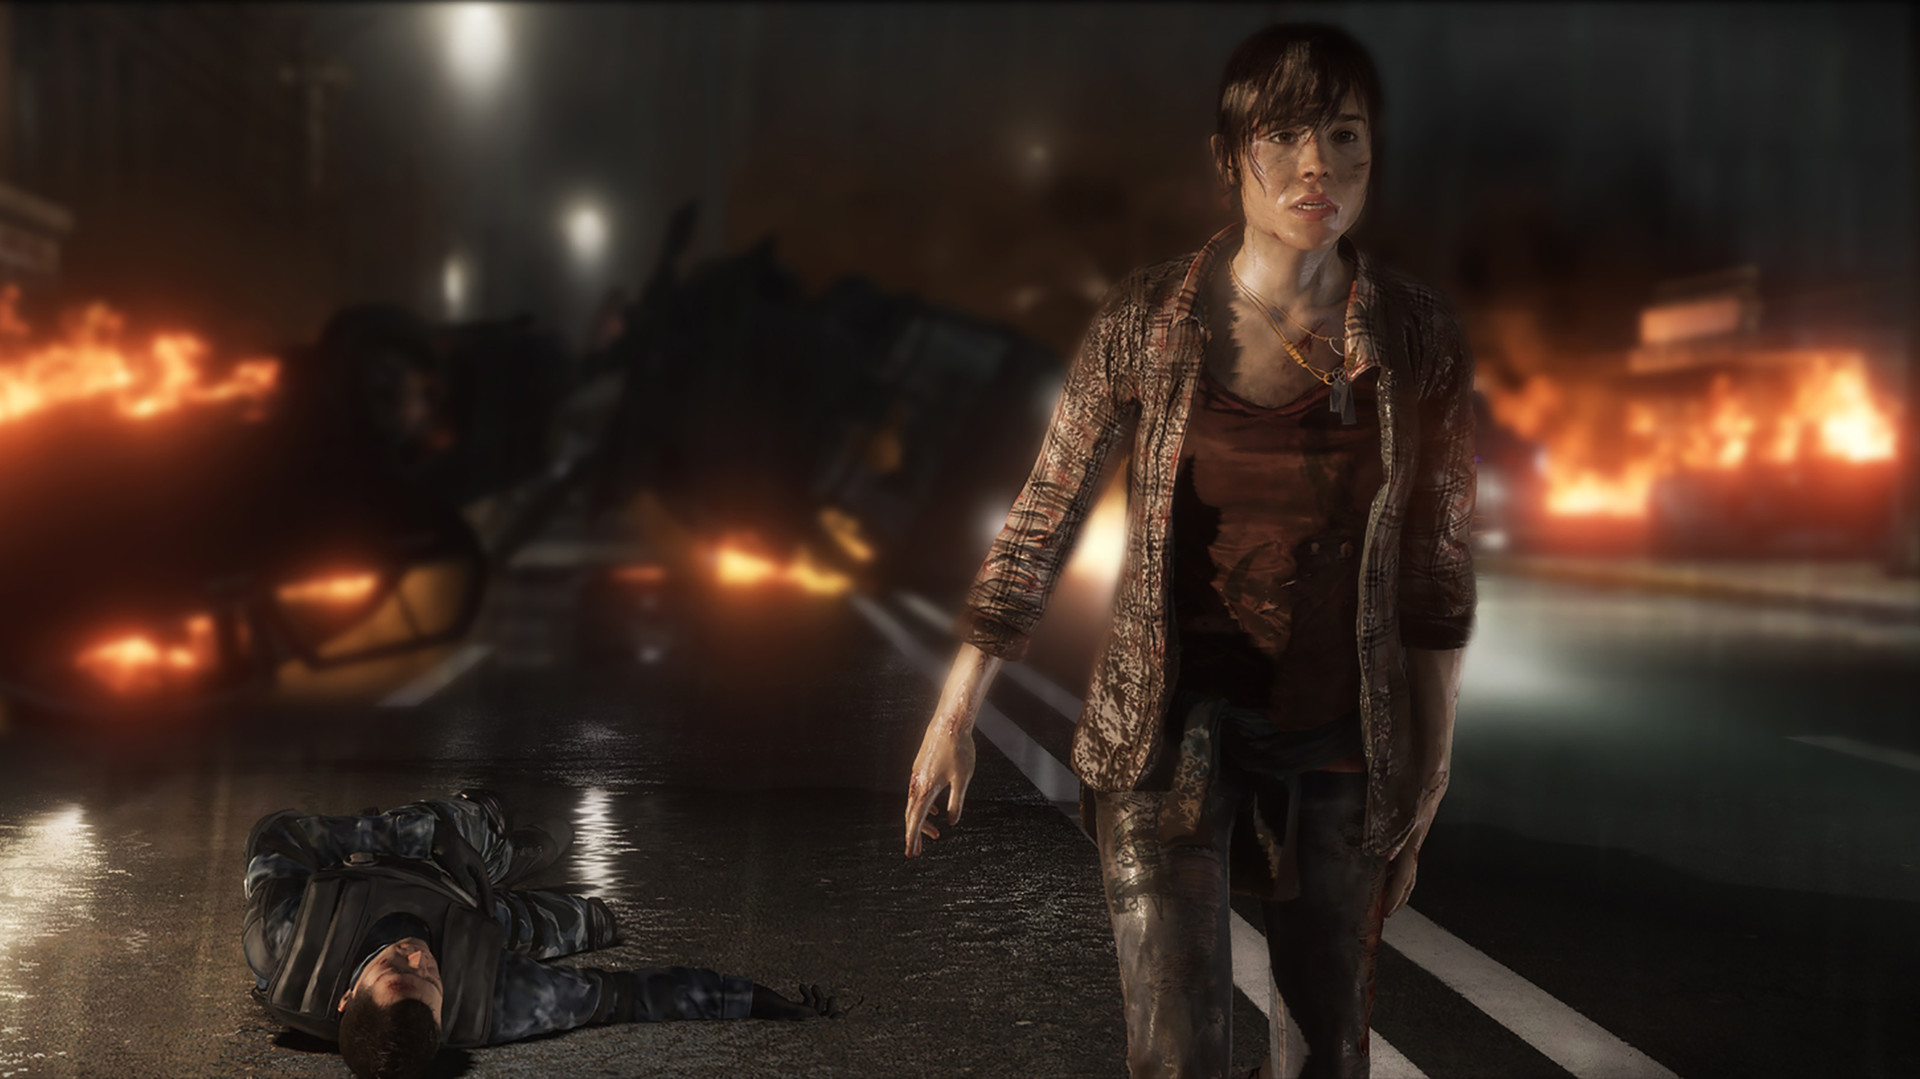 Save 50% on Beyond: Two Souls on